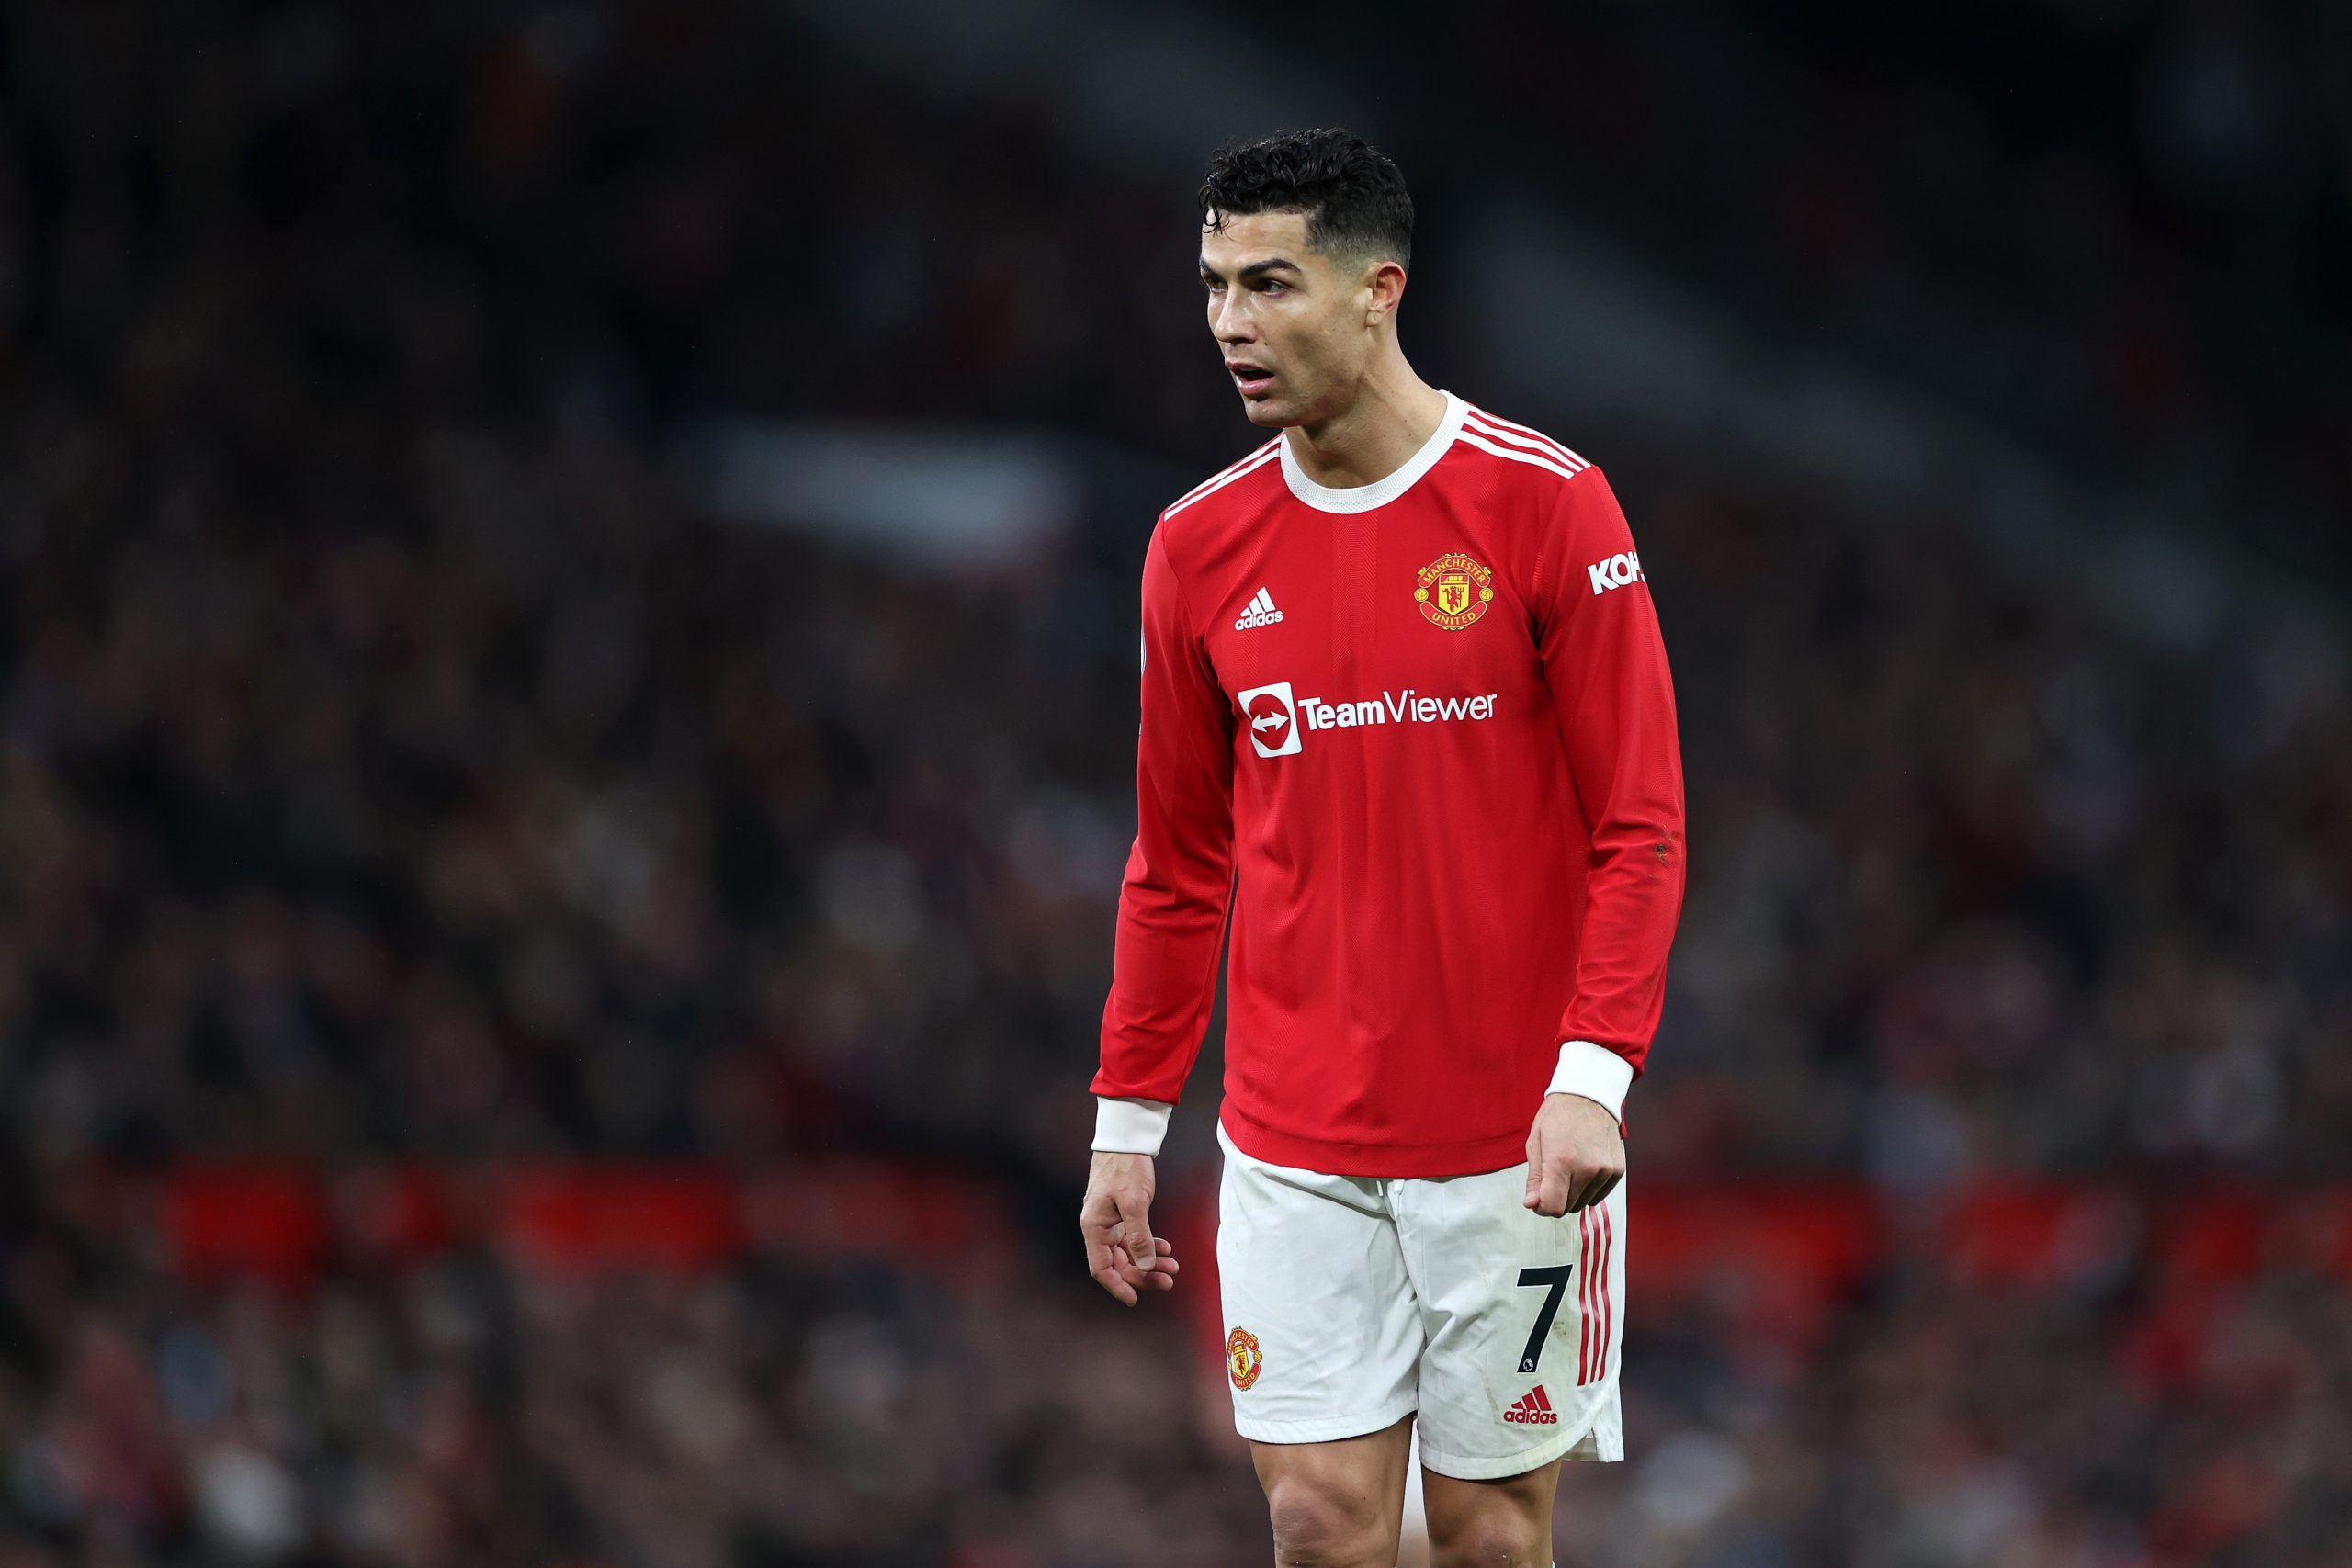 Jamie Carragher believes Manchester United should let Cristiano Ronaldo leave after pre-season drama.